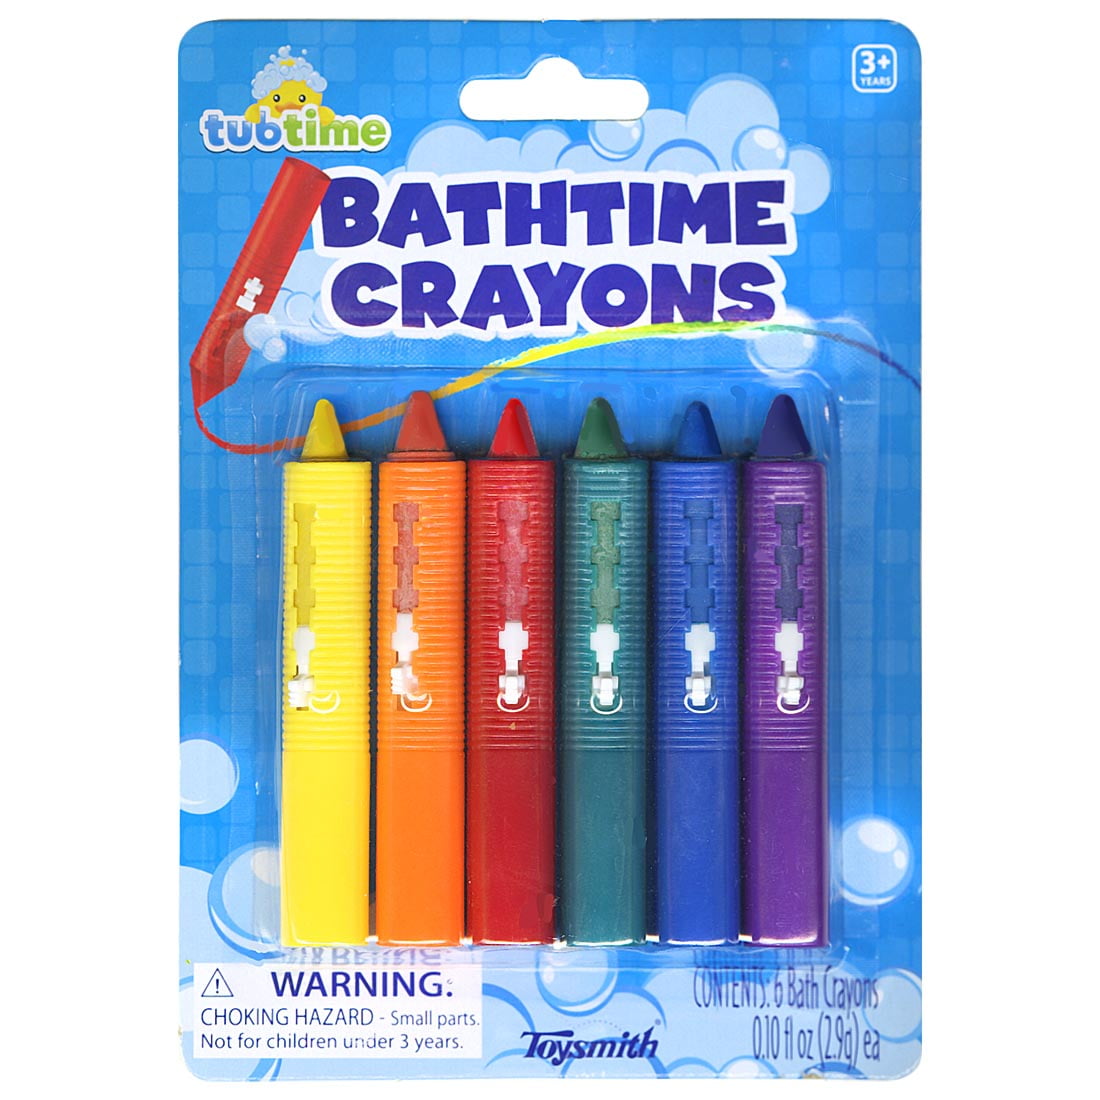  Honeysticks Bath Crayons for Toddlers & Kids - Handmade from  Natural Beeswax for Non Toxic Bathtub Fun - Fragrance Free, Non-Irritating  Bath Toys - Bright Colors and Easy to Hold 